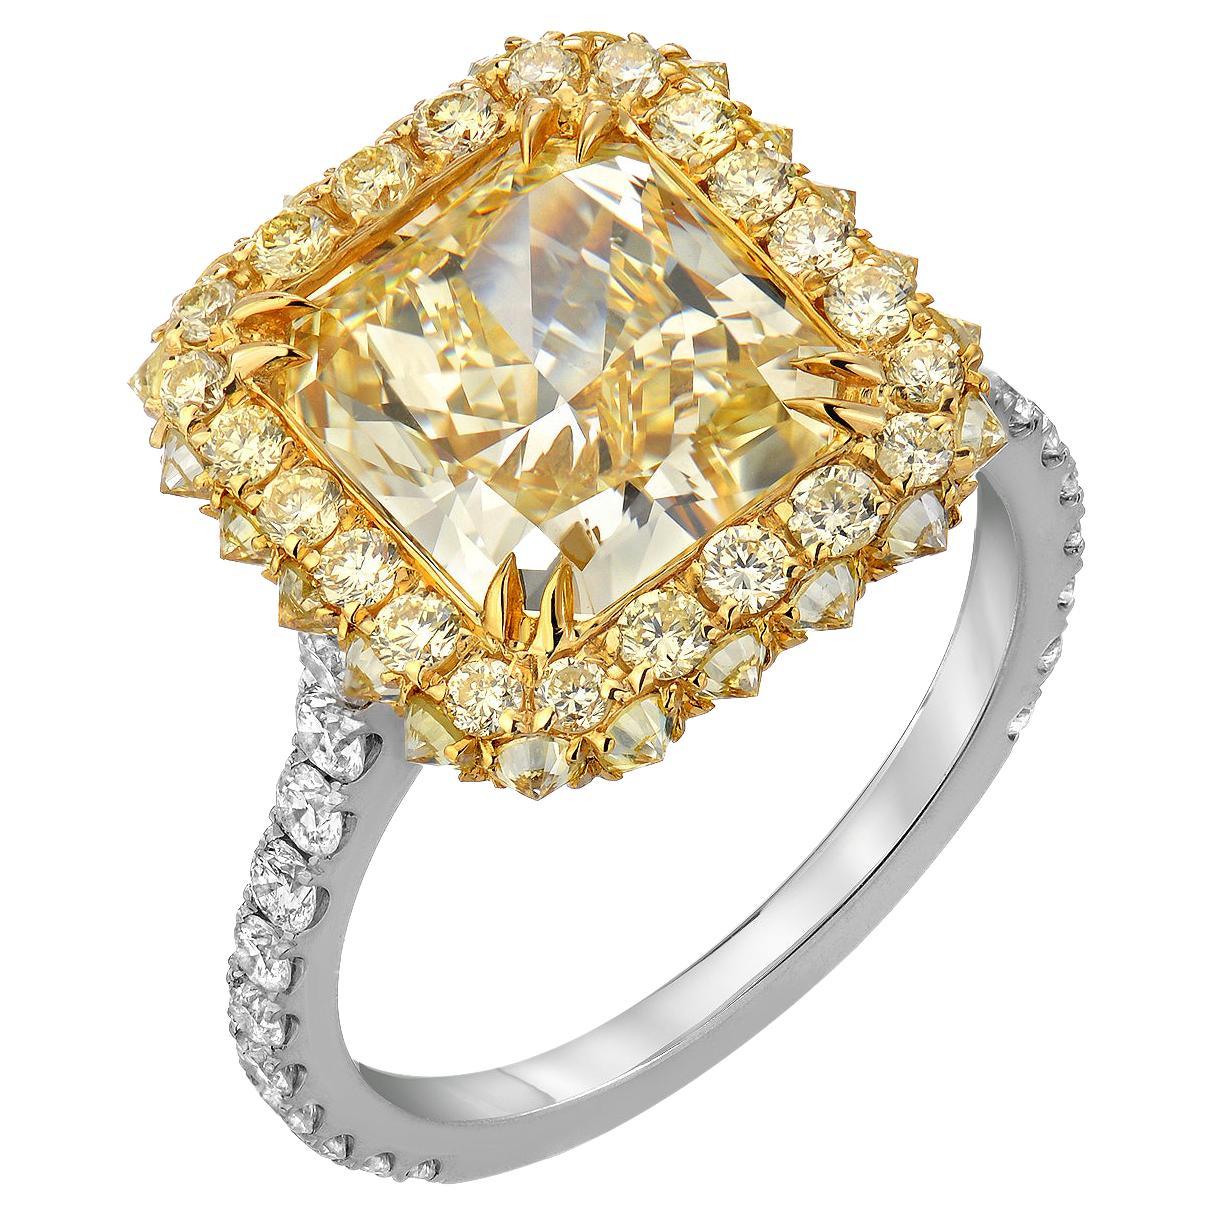 Fancy Light Yellow Diamond Ring 3.78 Carat Radiant Cut GIA Certified For Sale 4